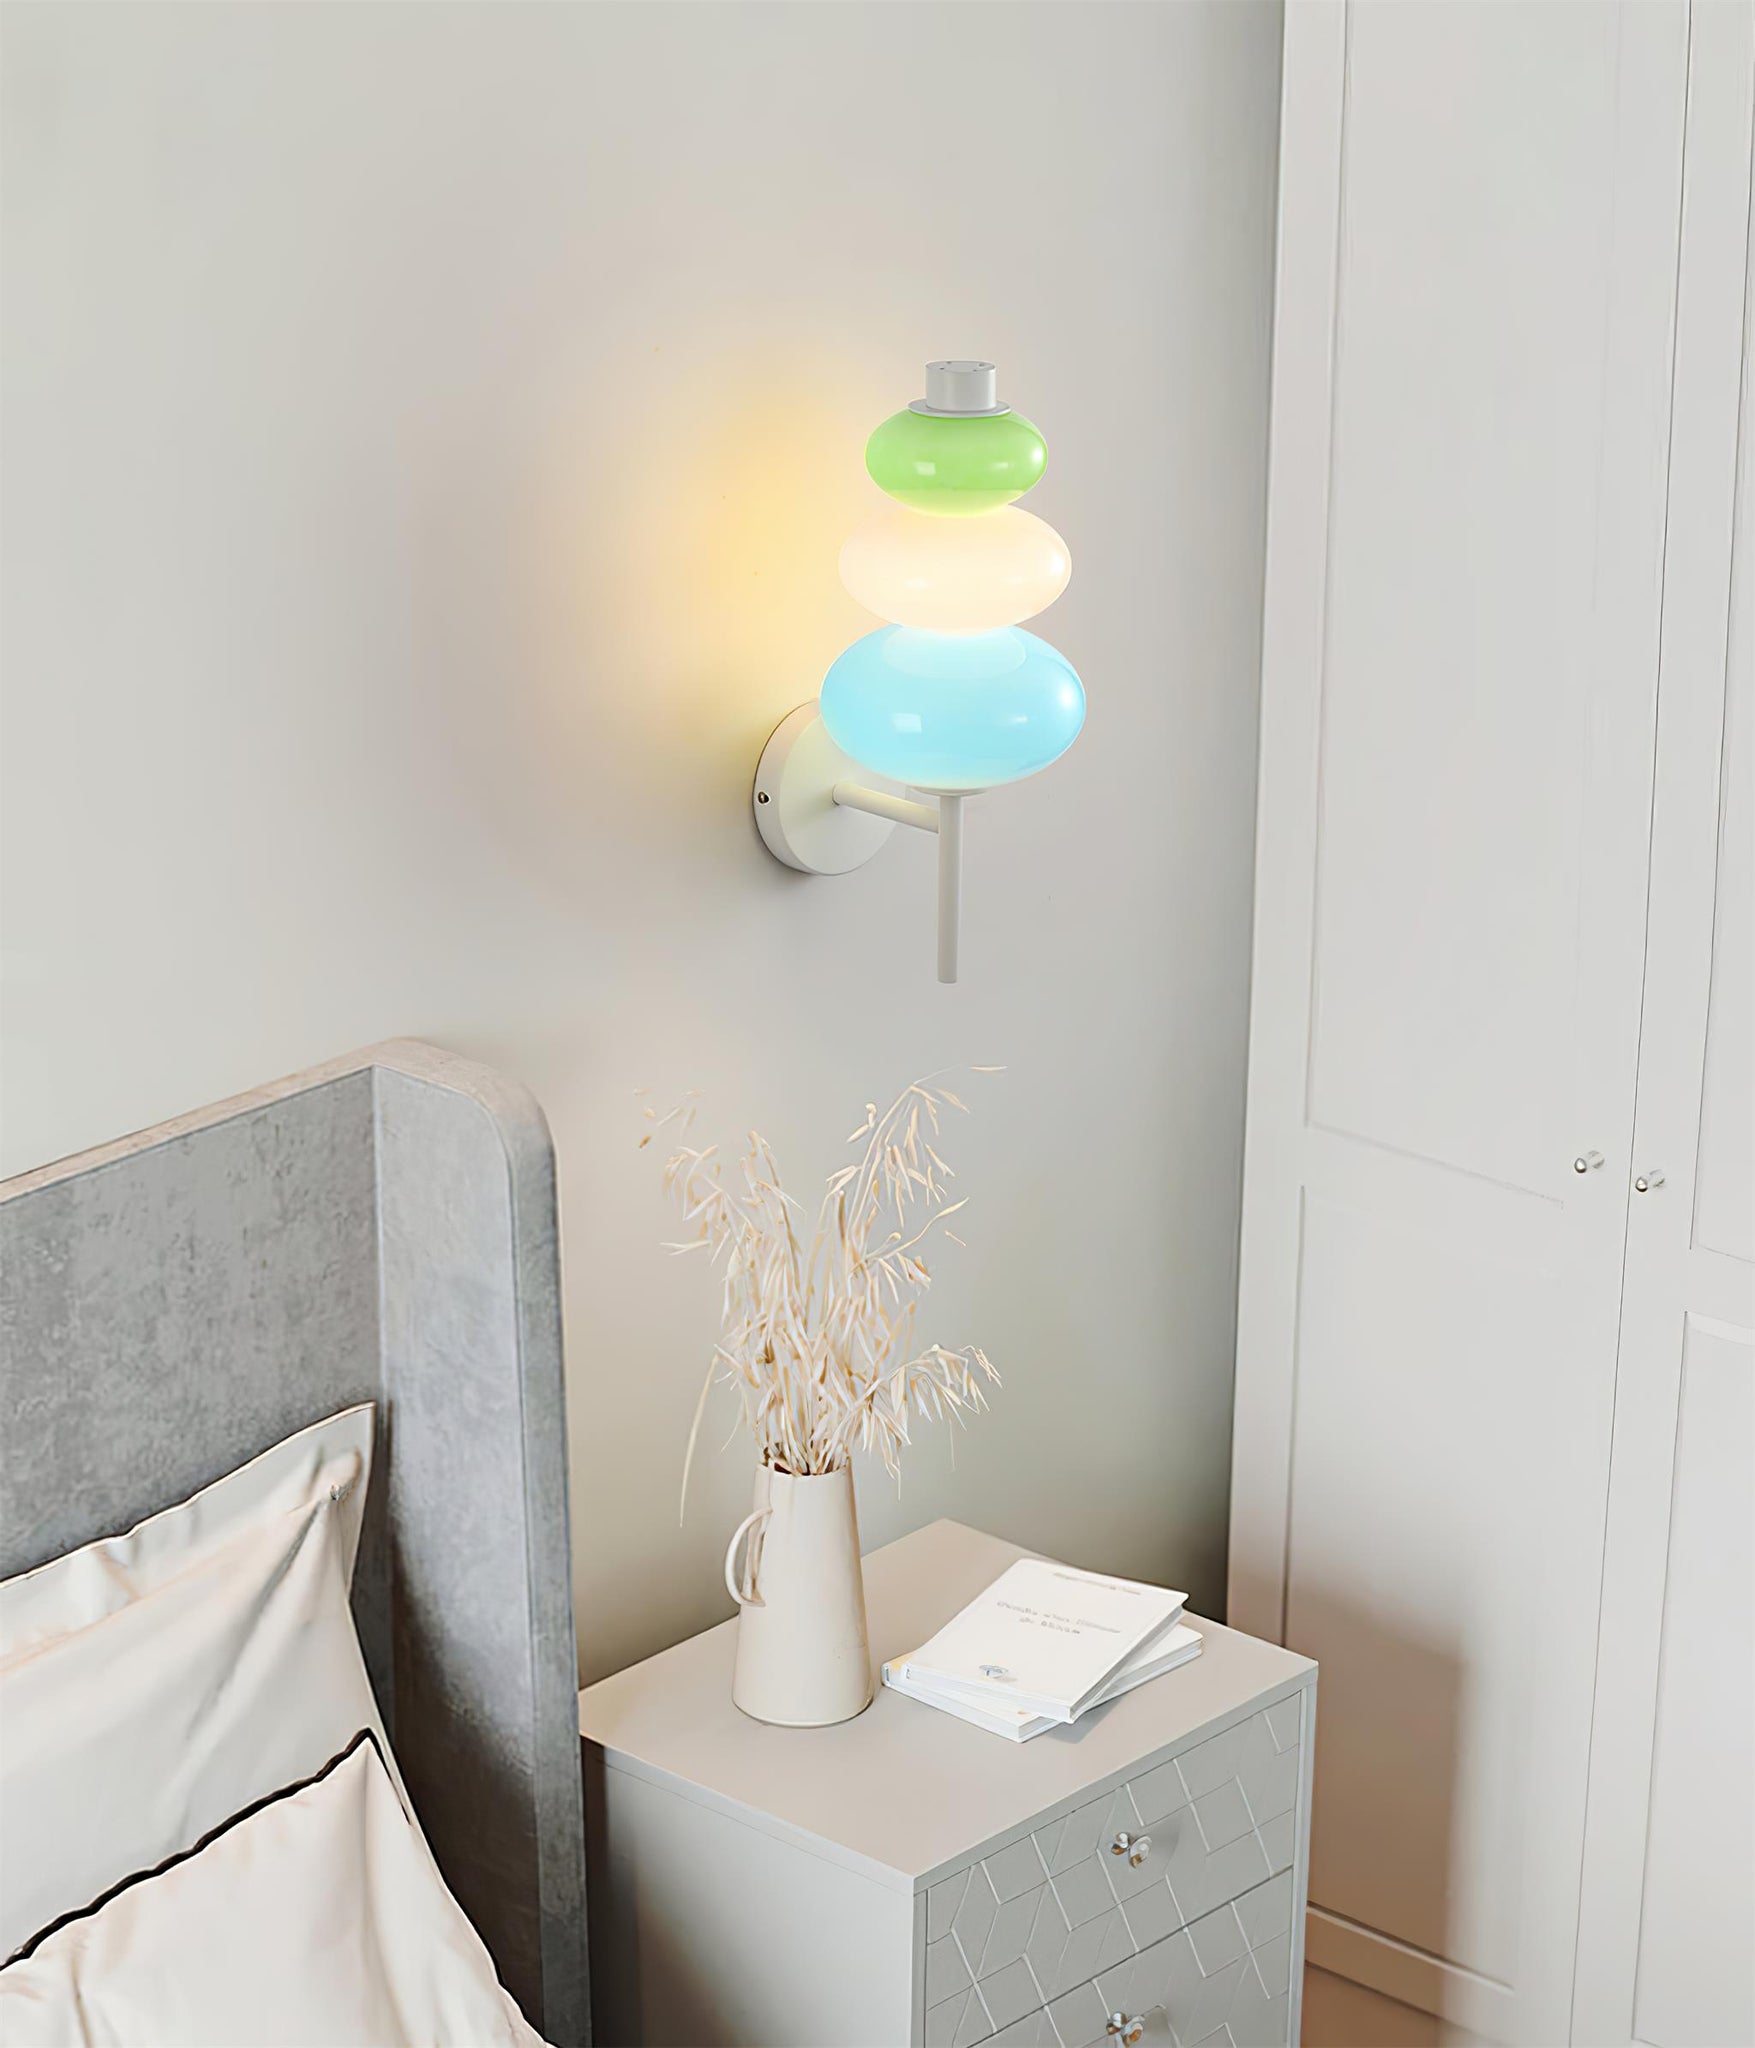 Kids' Room Lighting: Rules to Remember